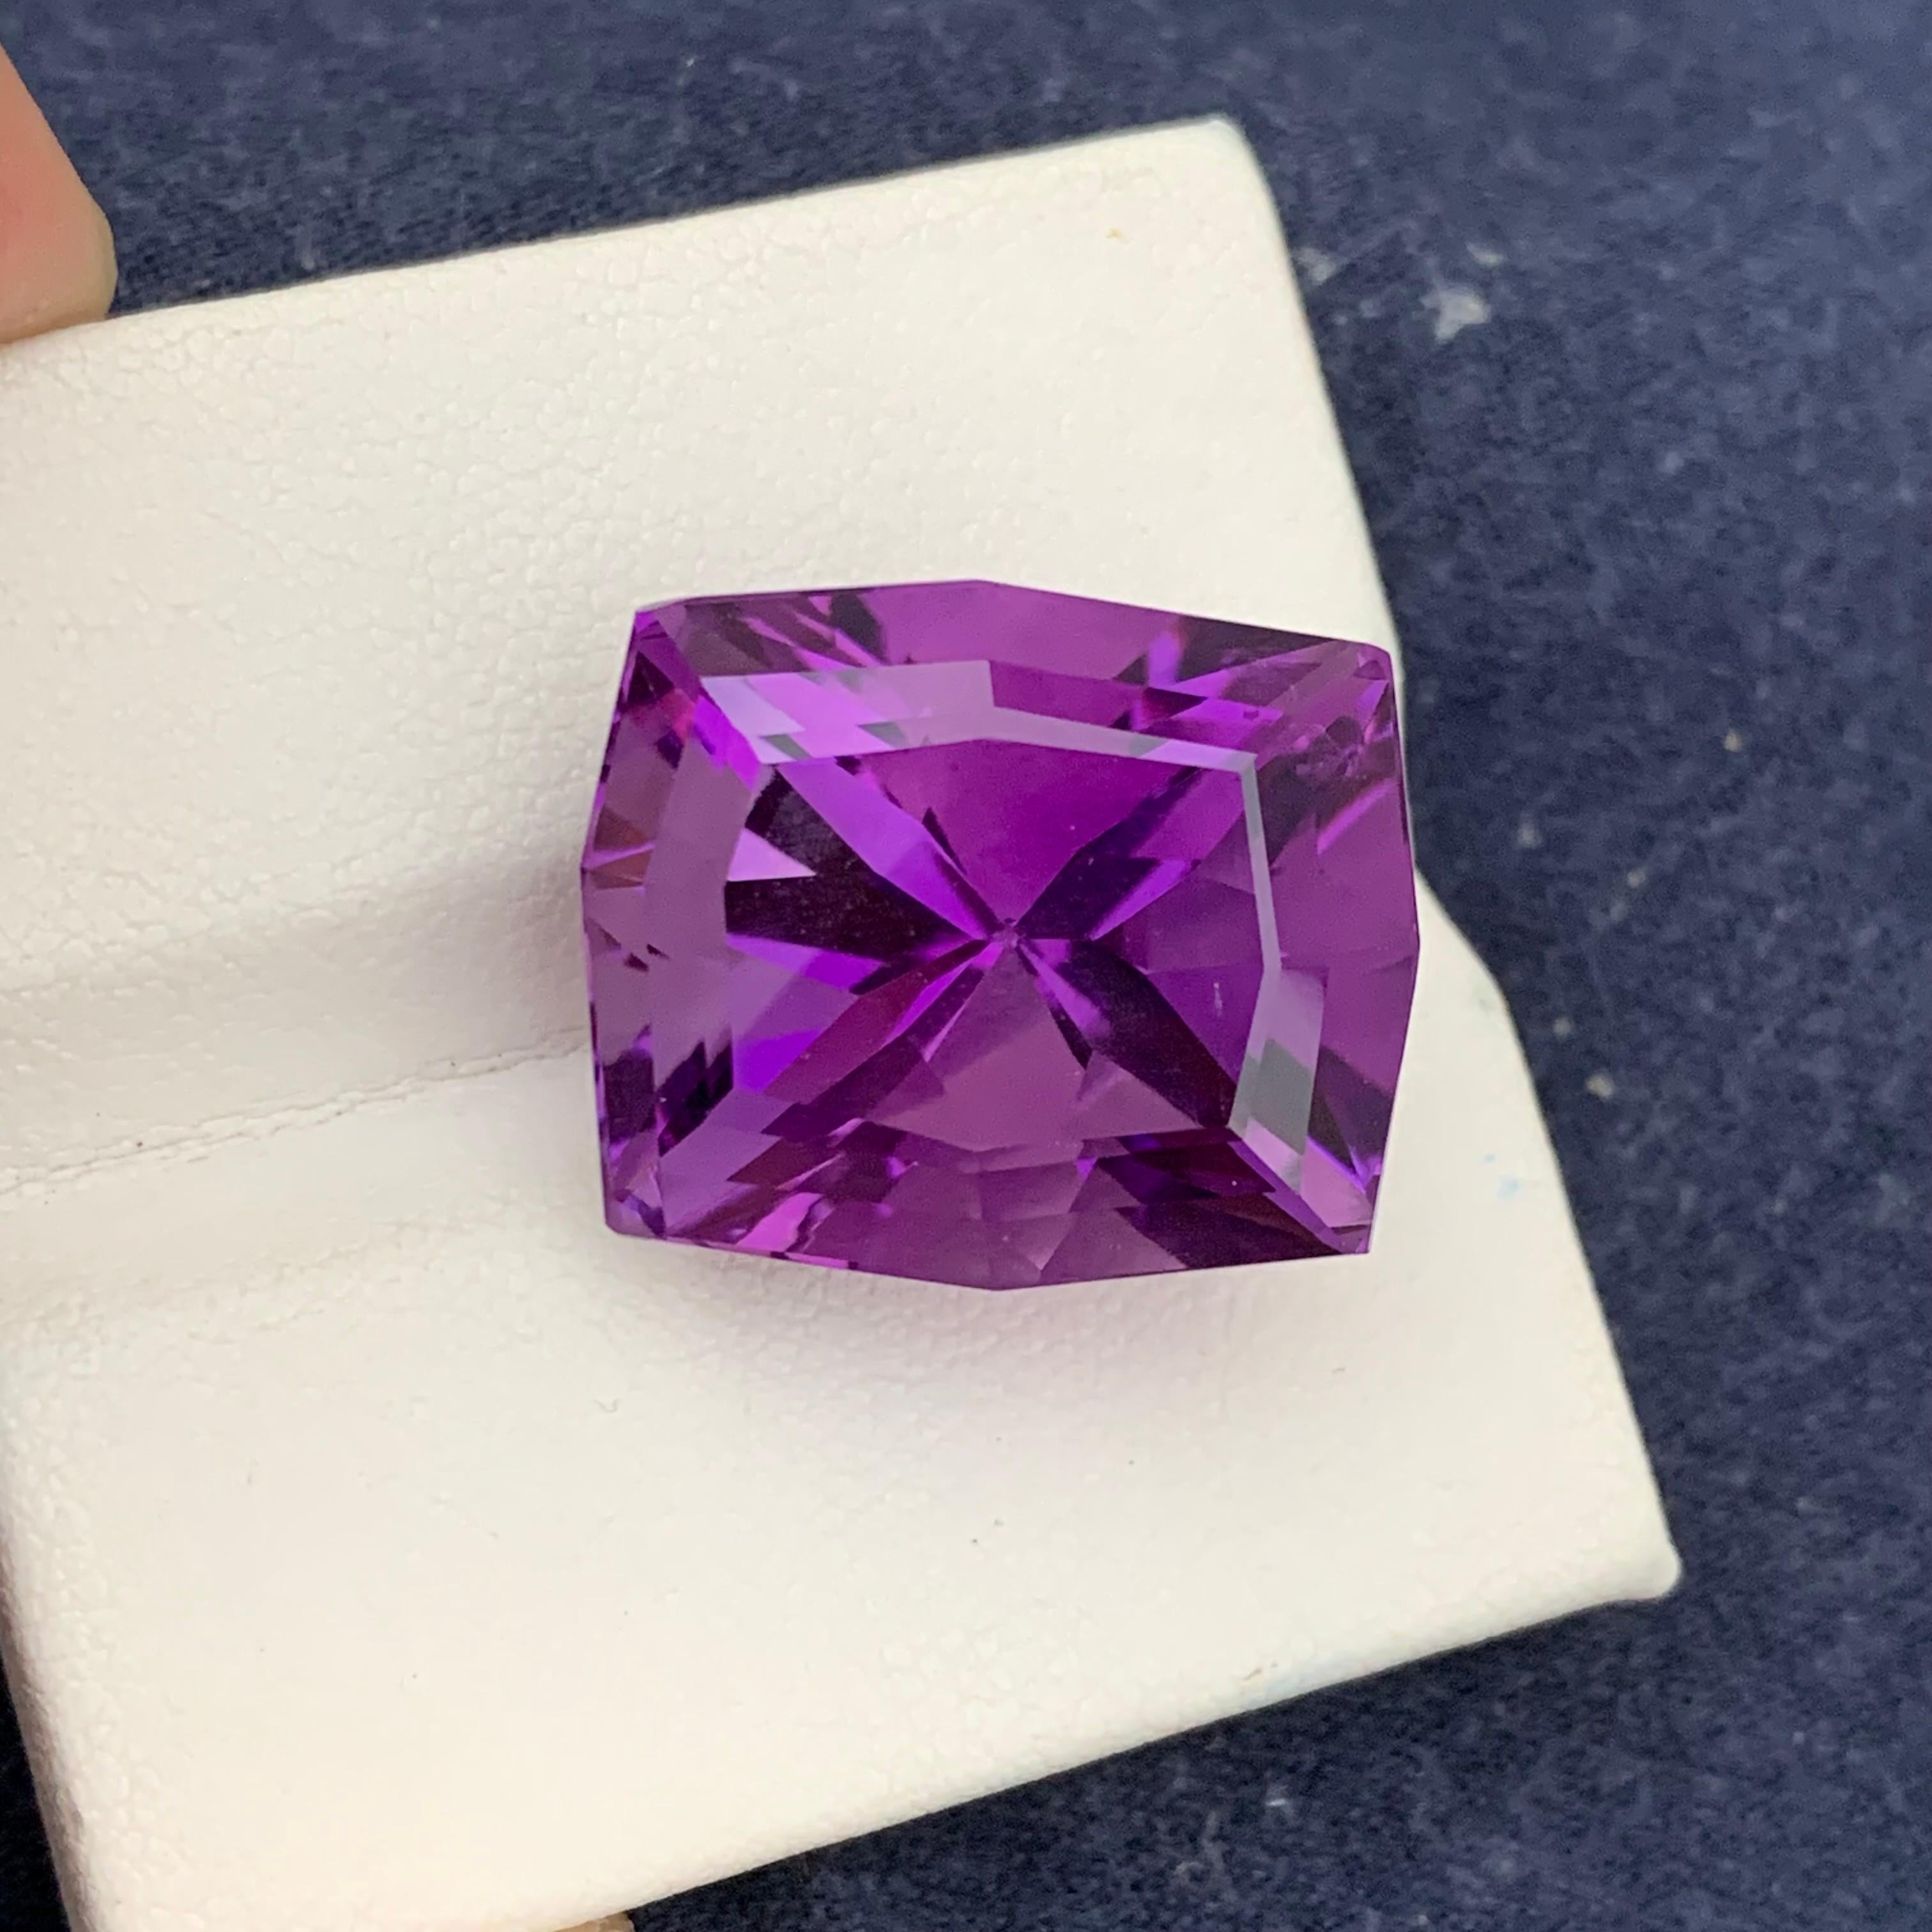 Loose Amethyst 
Weight: 33.70 Carats 
Dimension: 20x16.9x16.1 Mm
Origin: Brazil 
Color: Purple
Shape: Octagon
Treatment: Non
Amethyst, the striking purple variety of quartz, has captivated humans for centuries with its beauty and metaphysical